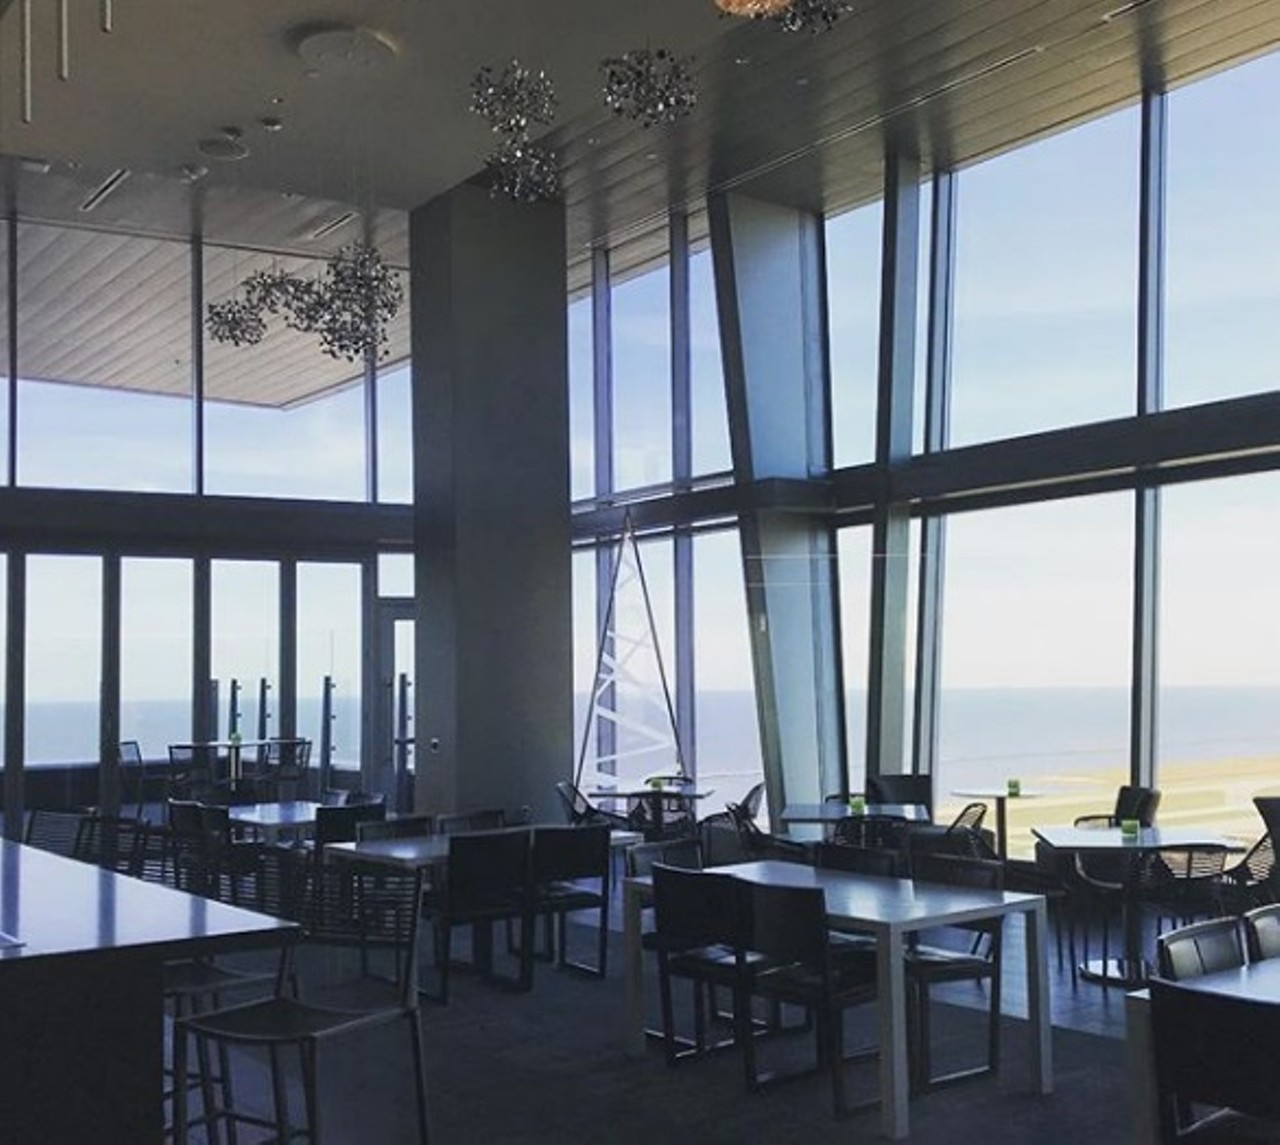 Bar 32
100 Lakeside Ave. E, 216-413-5000
Throw on your nice shirt or dress, grab your other half and enjoy a night out inside this stunning bar. Grab your drink and enjoy one of the best views of downtown Cleveland inside or on their patio. 
Photo via amycarstenquick/Instagram